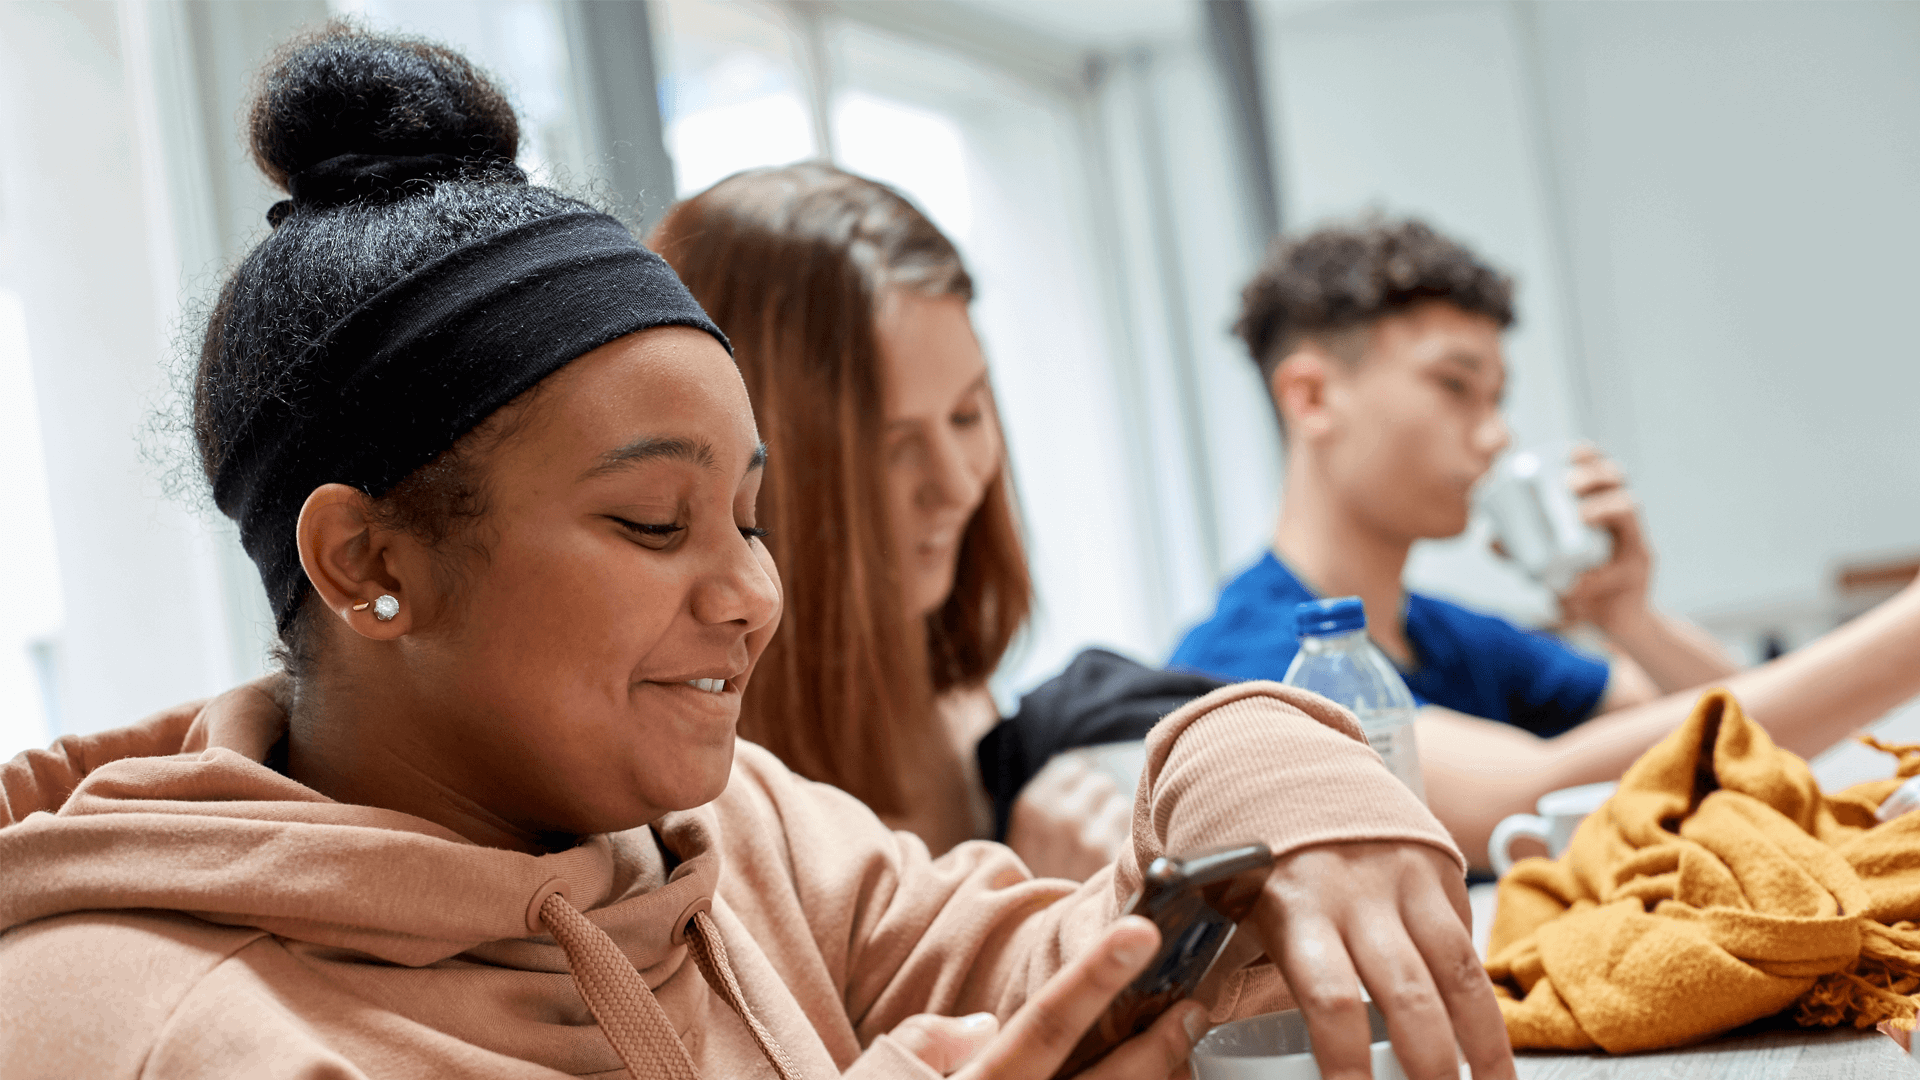 medium-shot-of-three-young-people-smiling-while-looking-at-their-phone-while-sitting-in-class